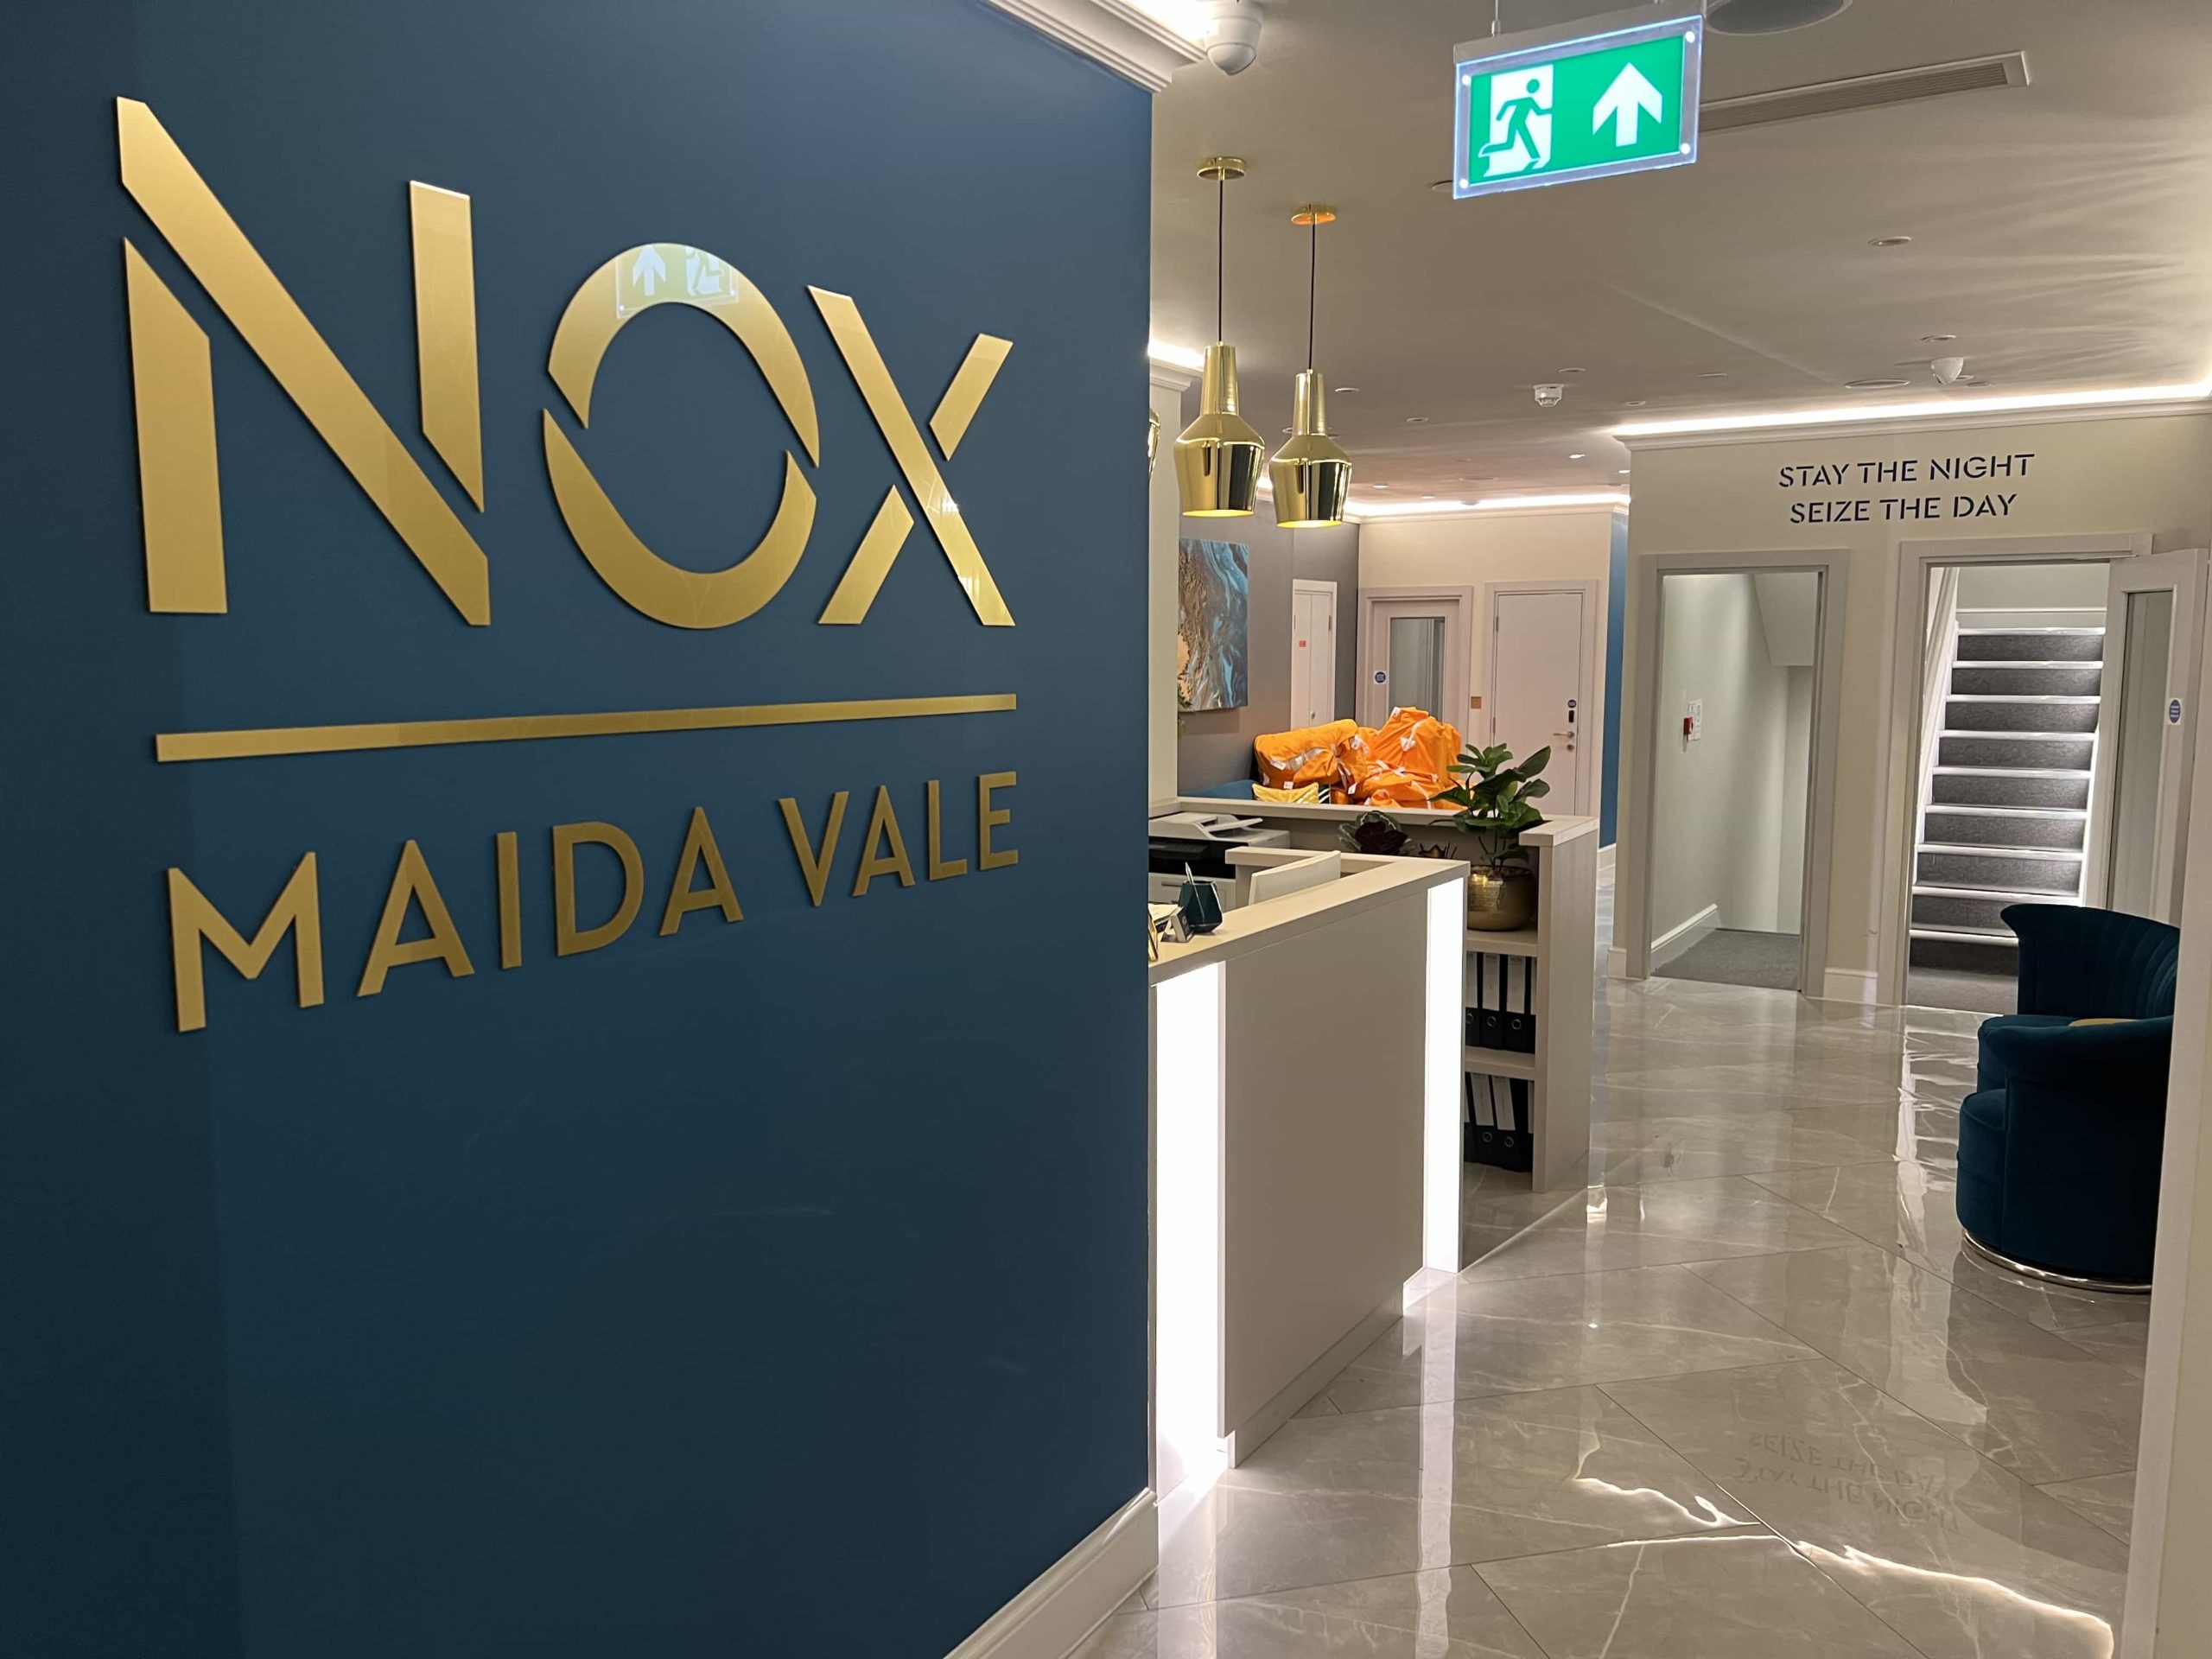 A large NOX, Maida Vale logo on the left, with the reception desk of the hotel lobby to the right